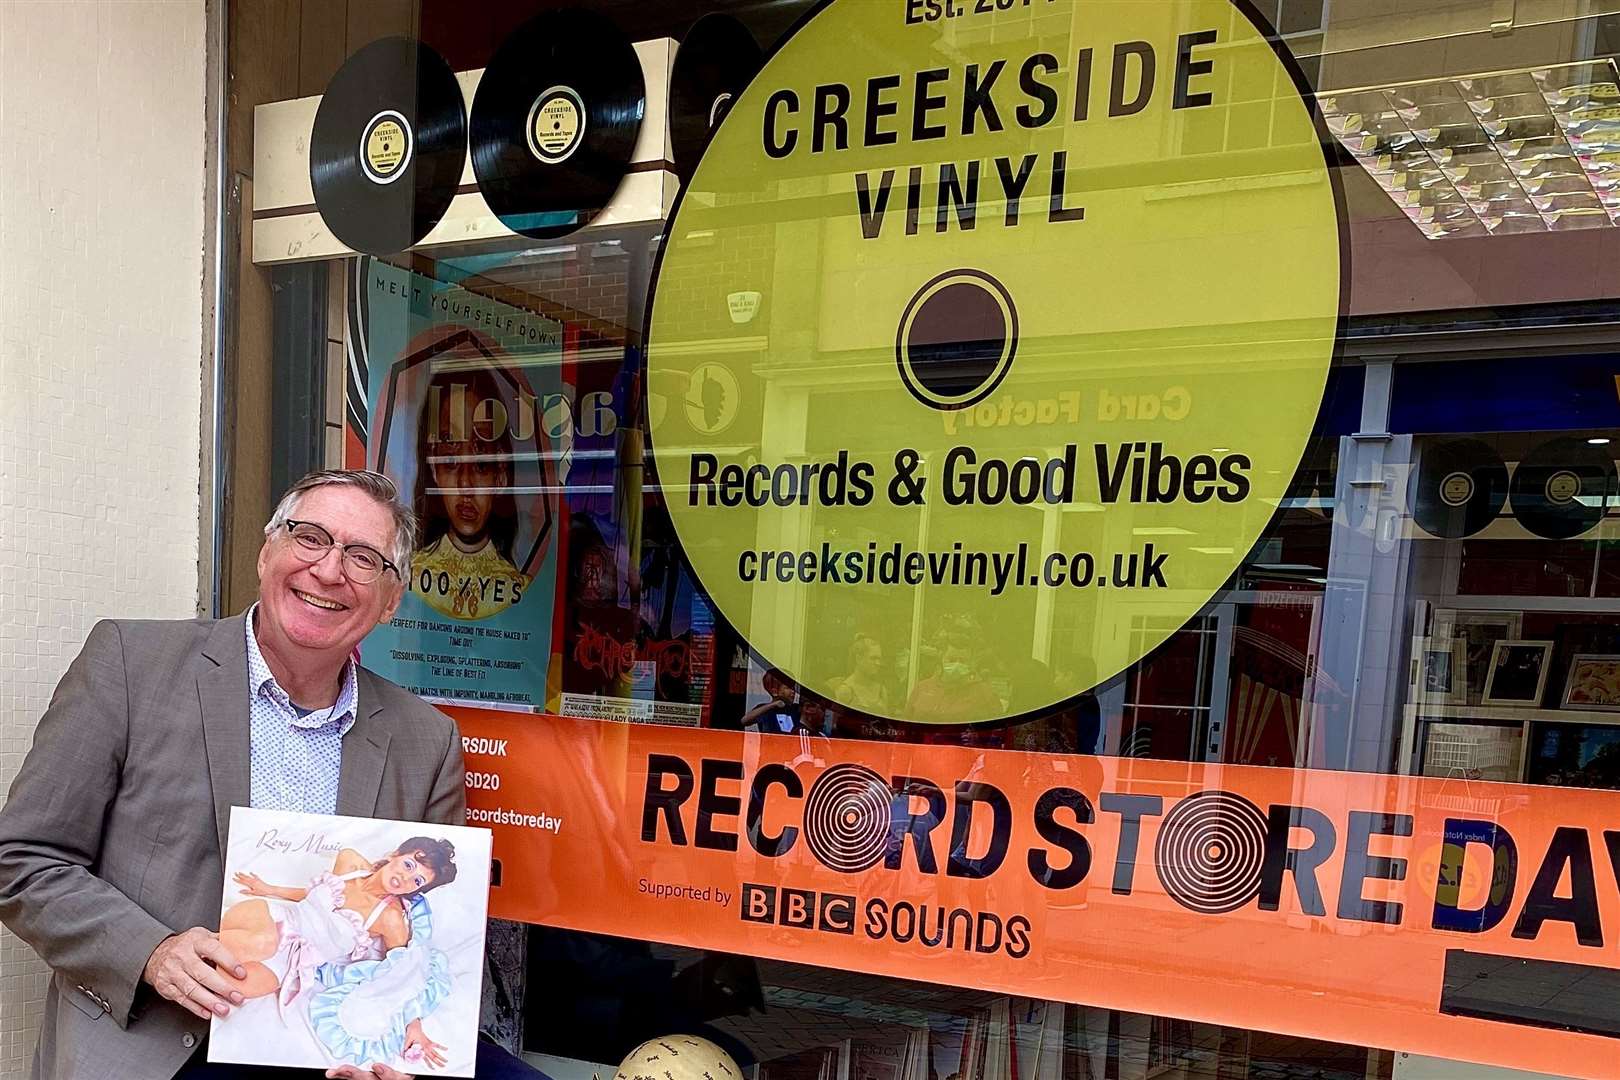 Simon is excited for Record Store Day but also thinks record label should do more to make vinyl affordable to young people